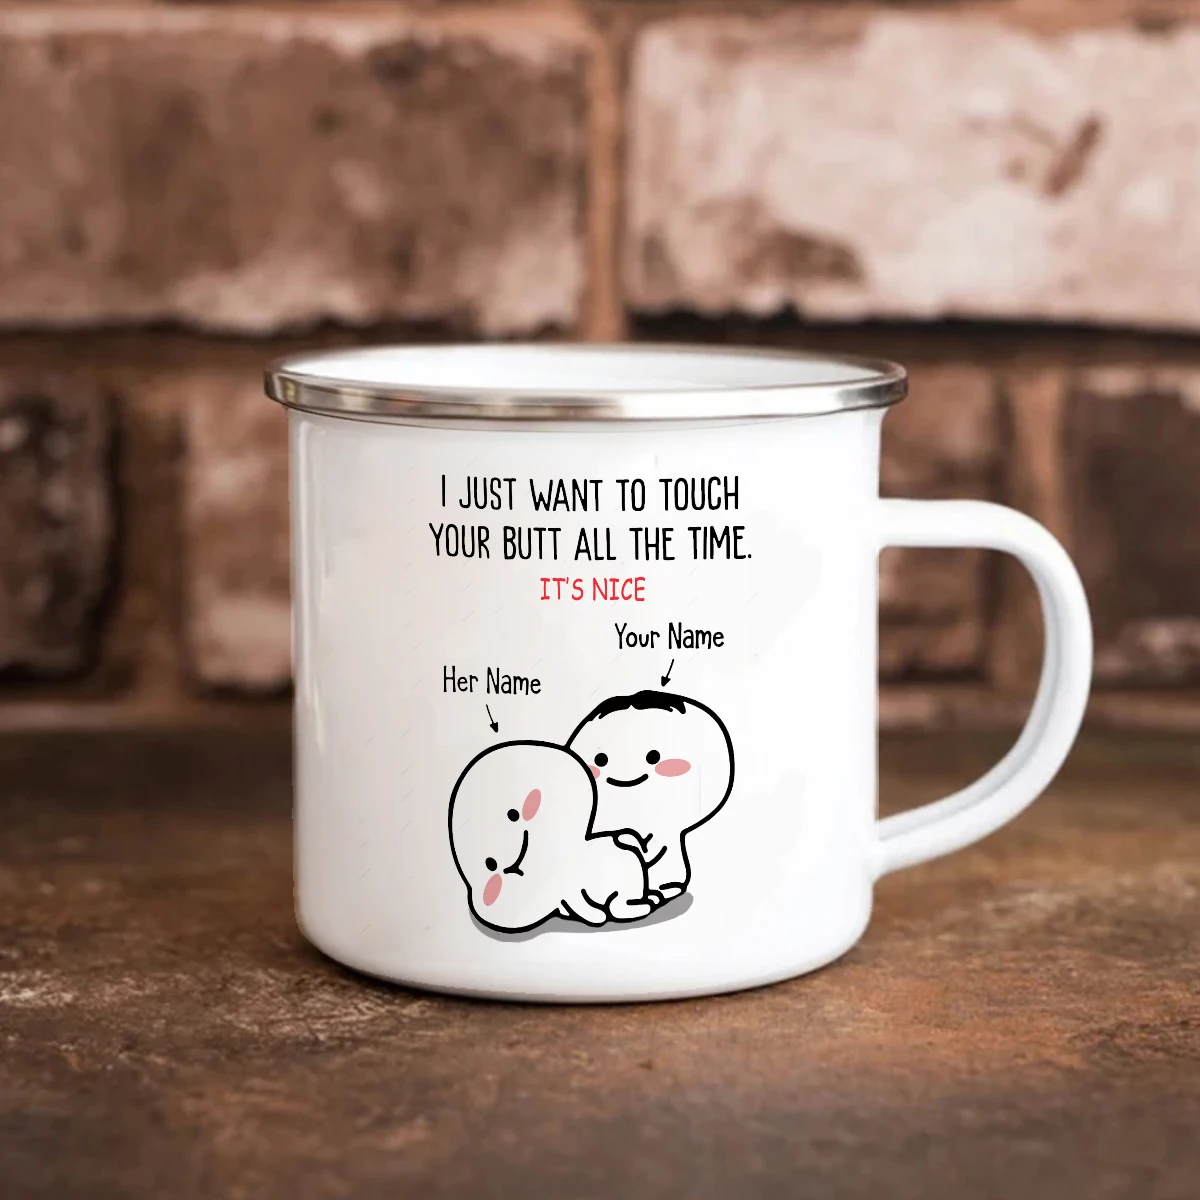 I Just Want To touch You Enamelled Cup Lover Couples Coffee Mug Friends Birthday Gift Drop Shipping